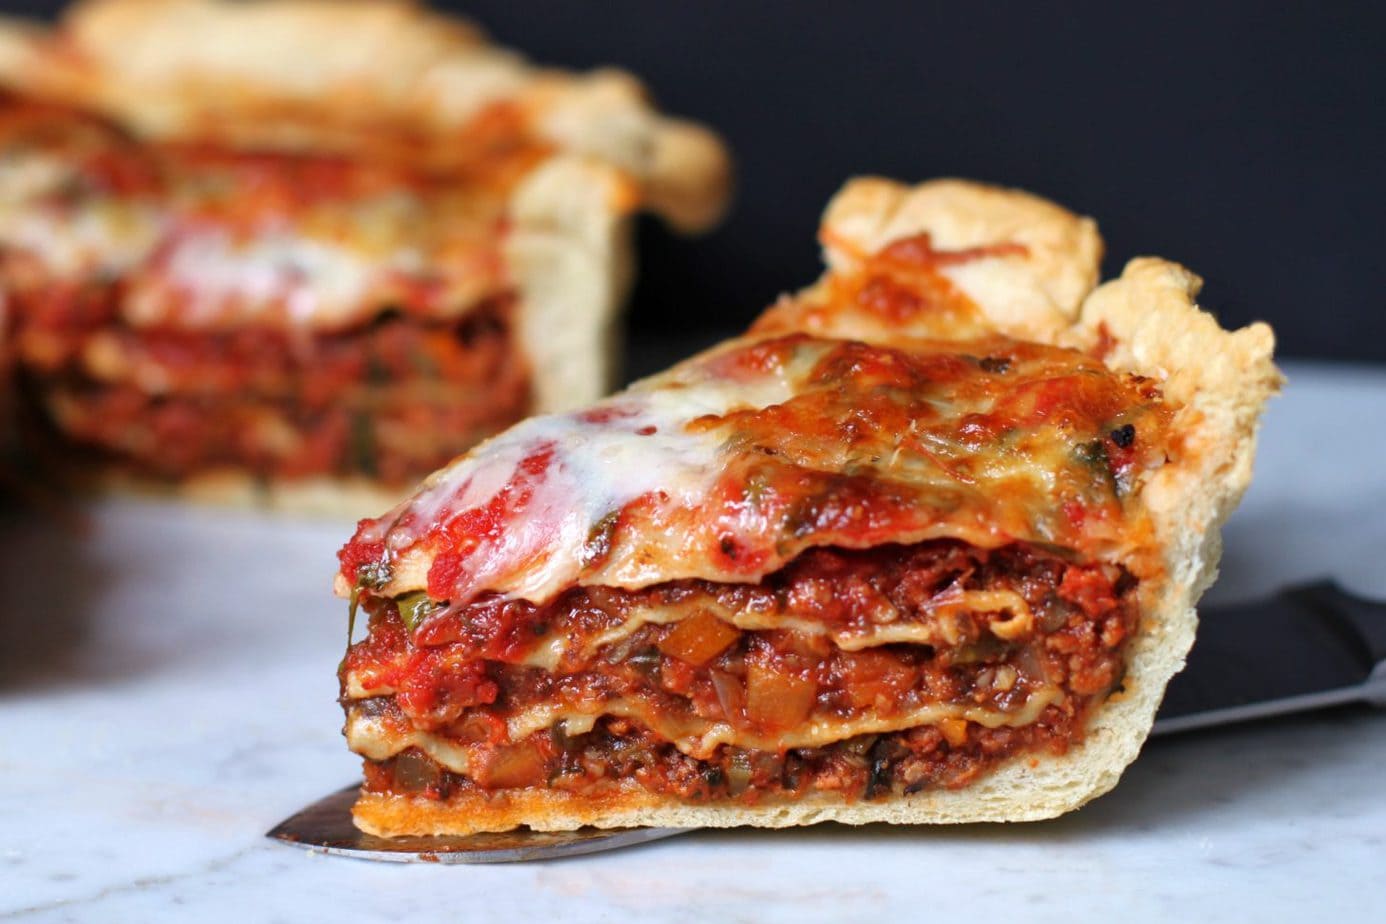 Sky High Pizza Pie is a creation of Epic Proportions. It's a Pizza, and a lasagne all in one! #lasagne #lasagna #lasagnapizza #pizza #deepdishpizza